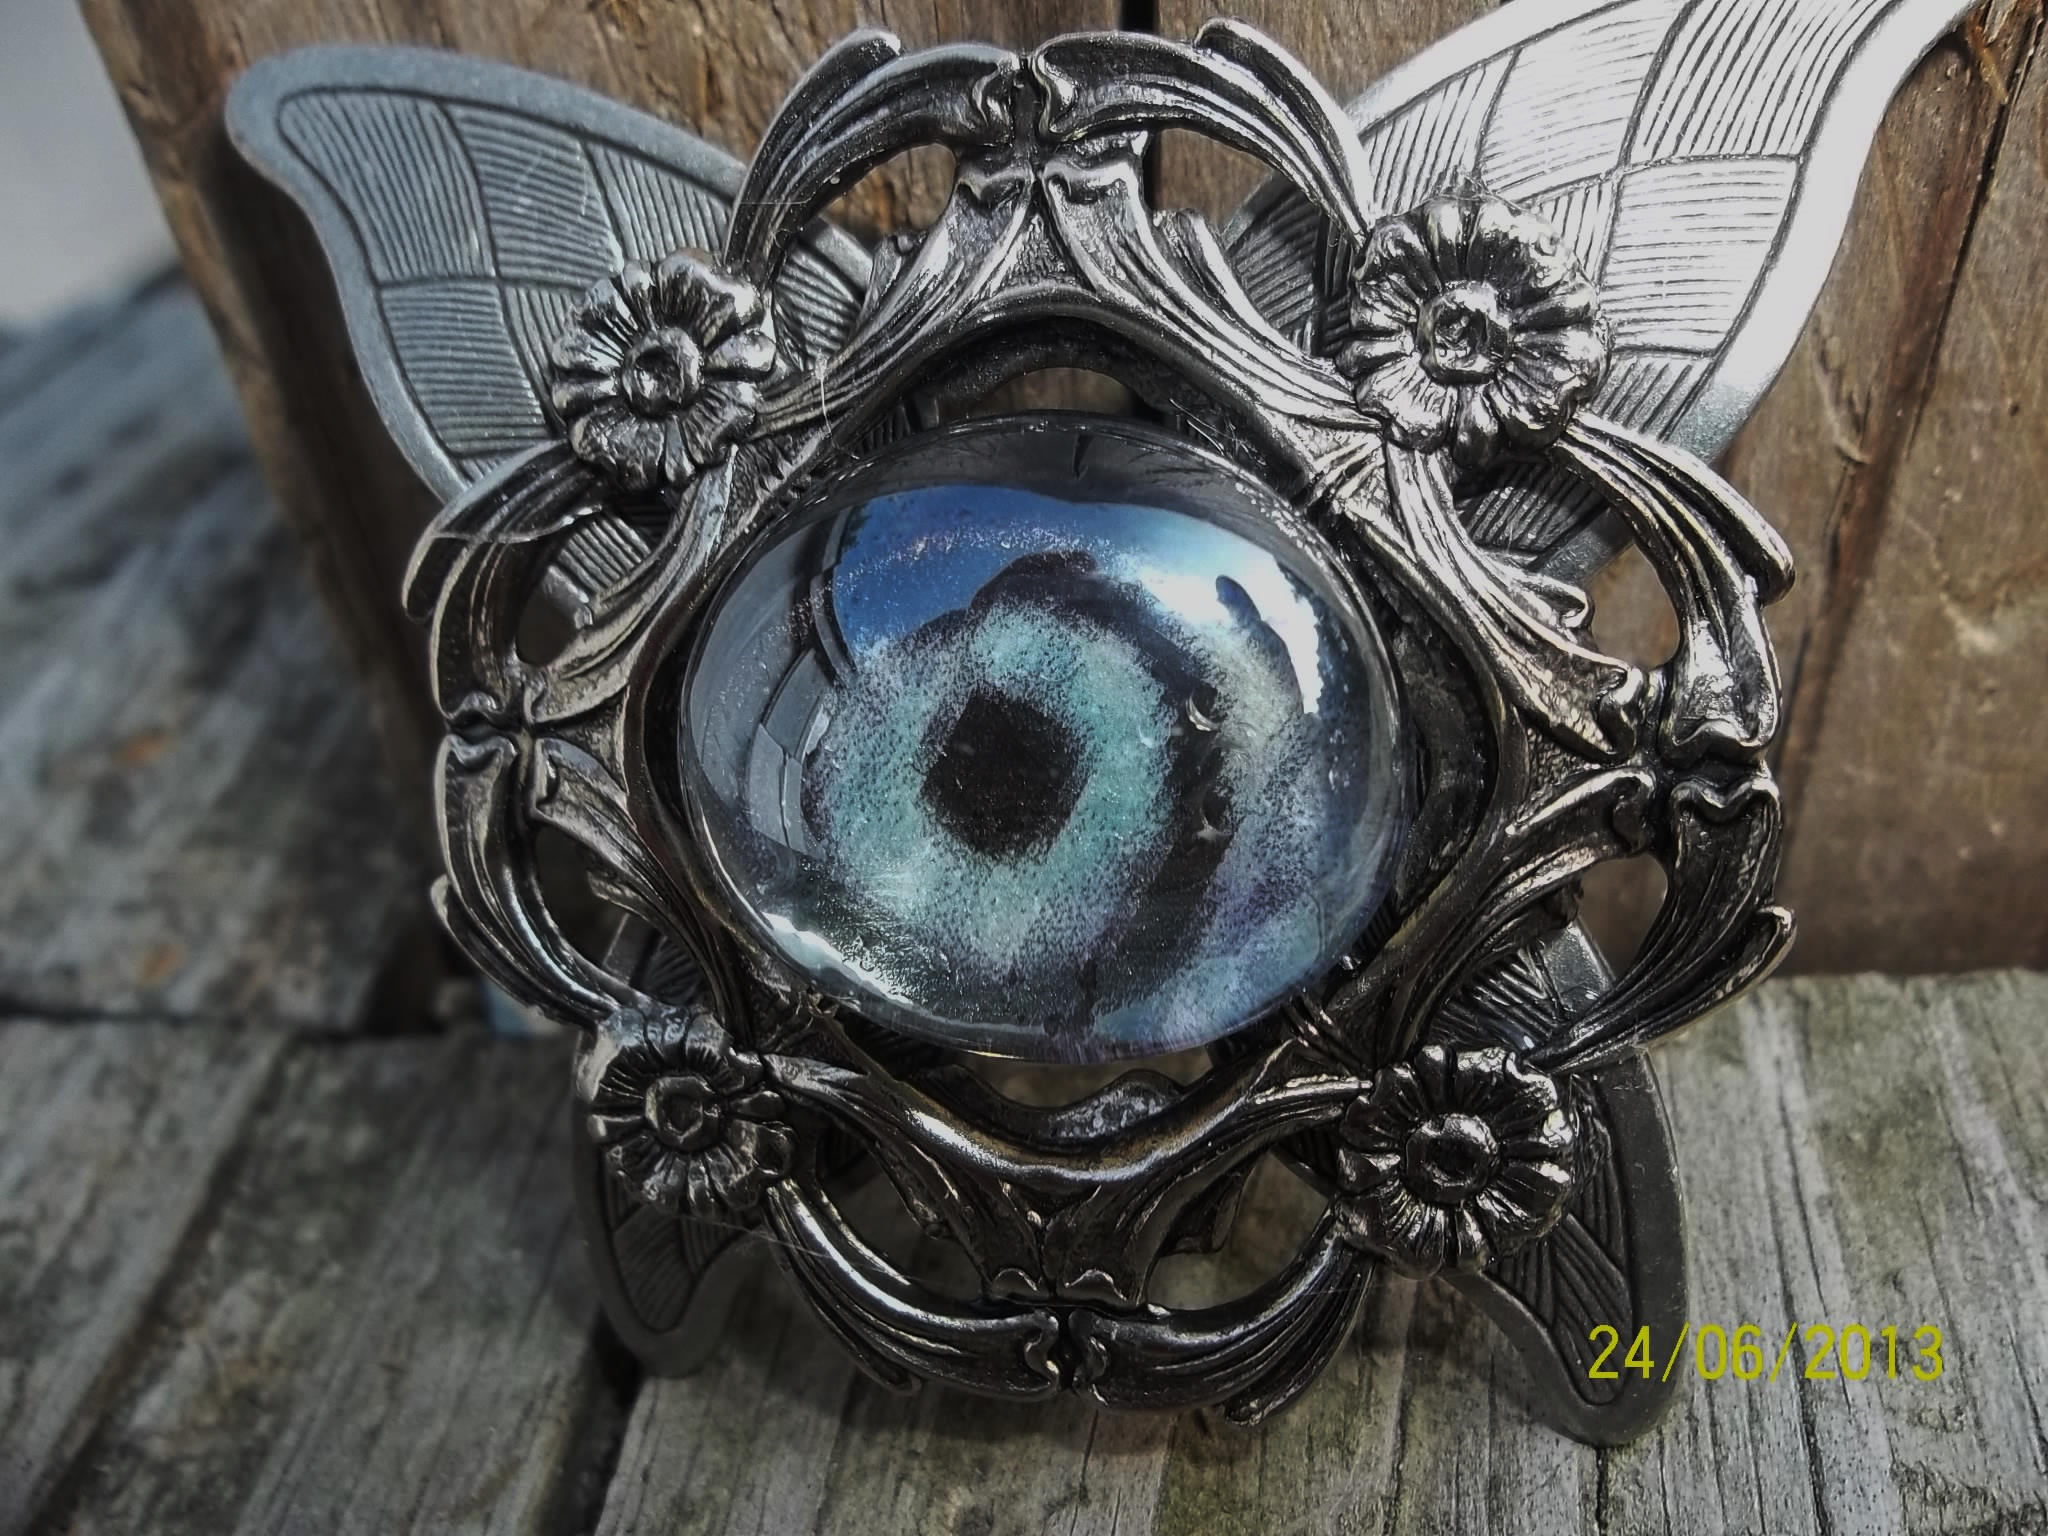 "The Eye of Good Luck" created by me and for me follows me wherever I go.